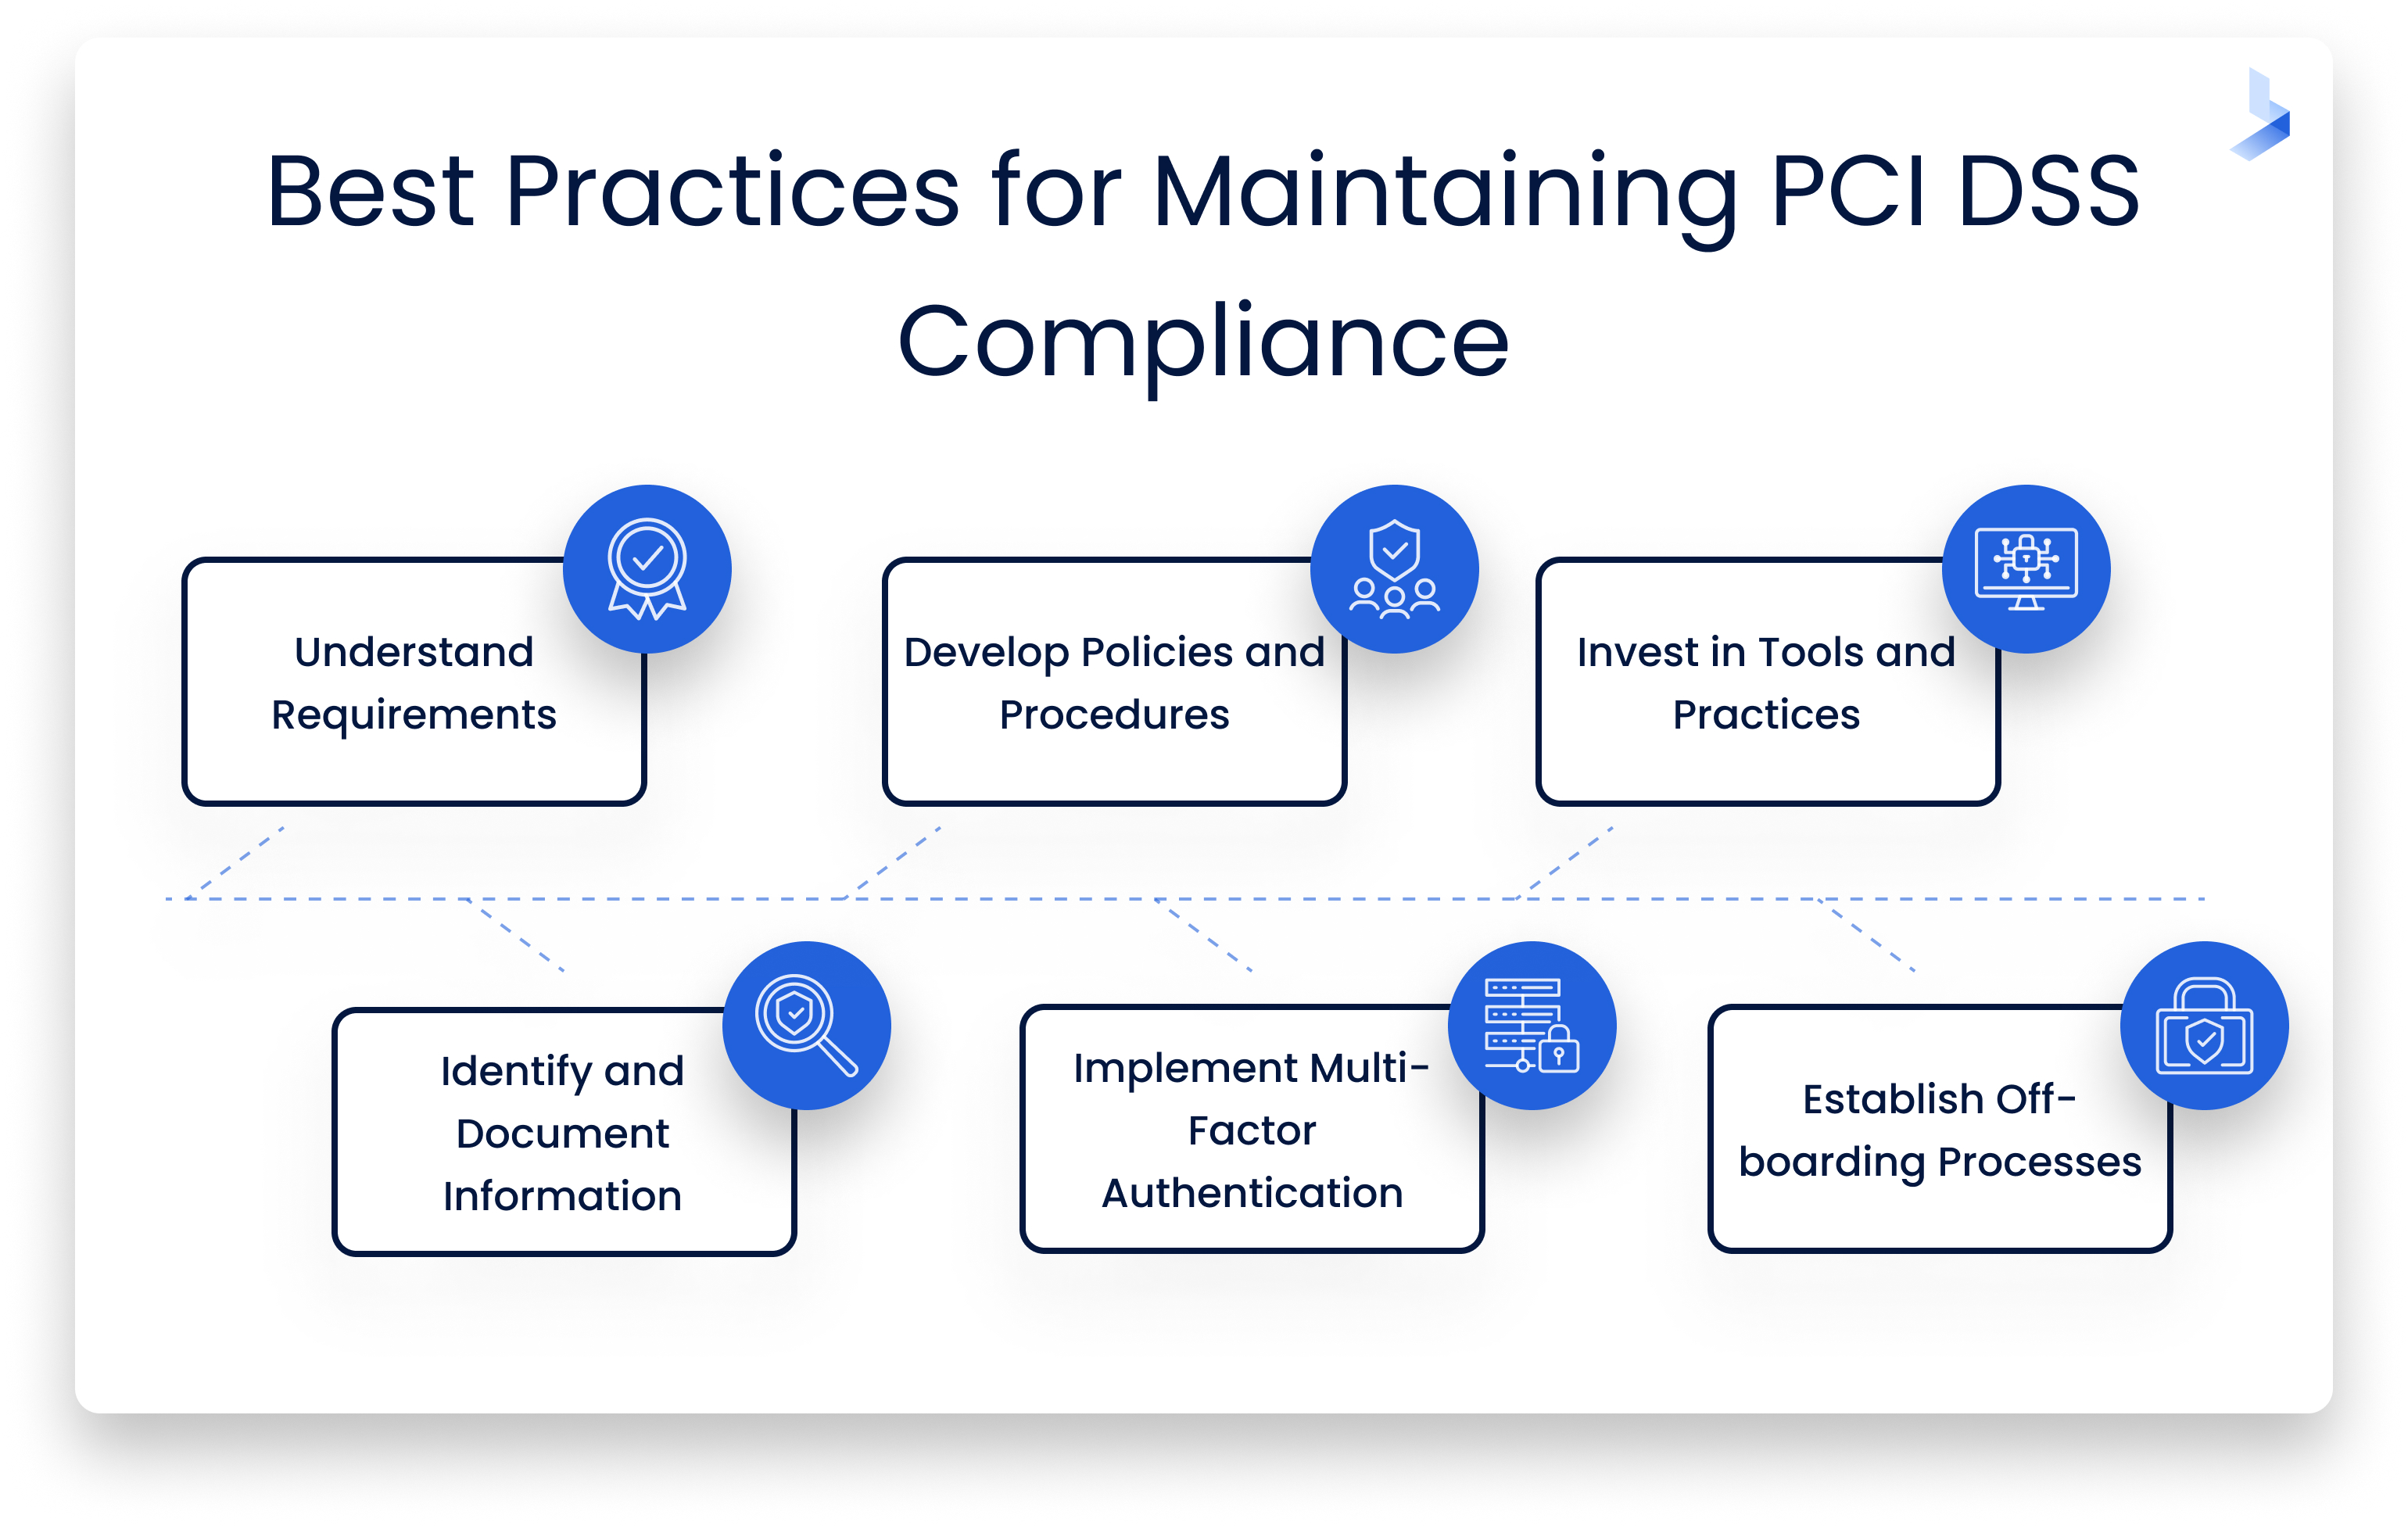 Best-practices-for-maintaining-pci-dss